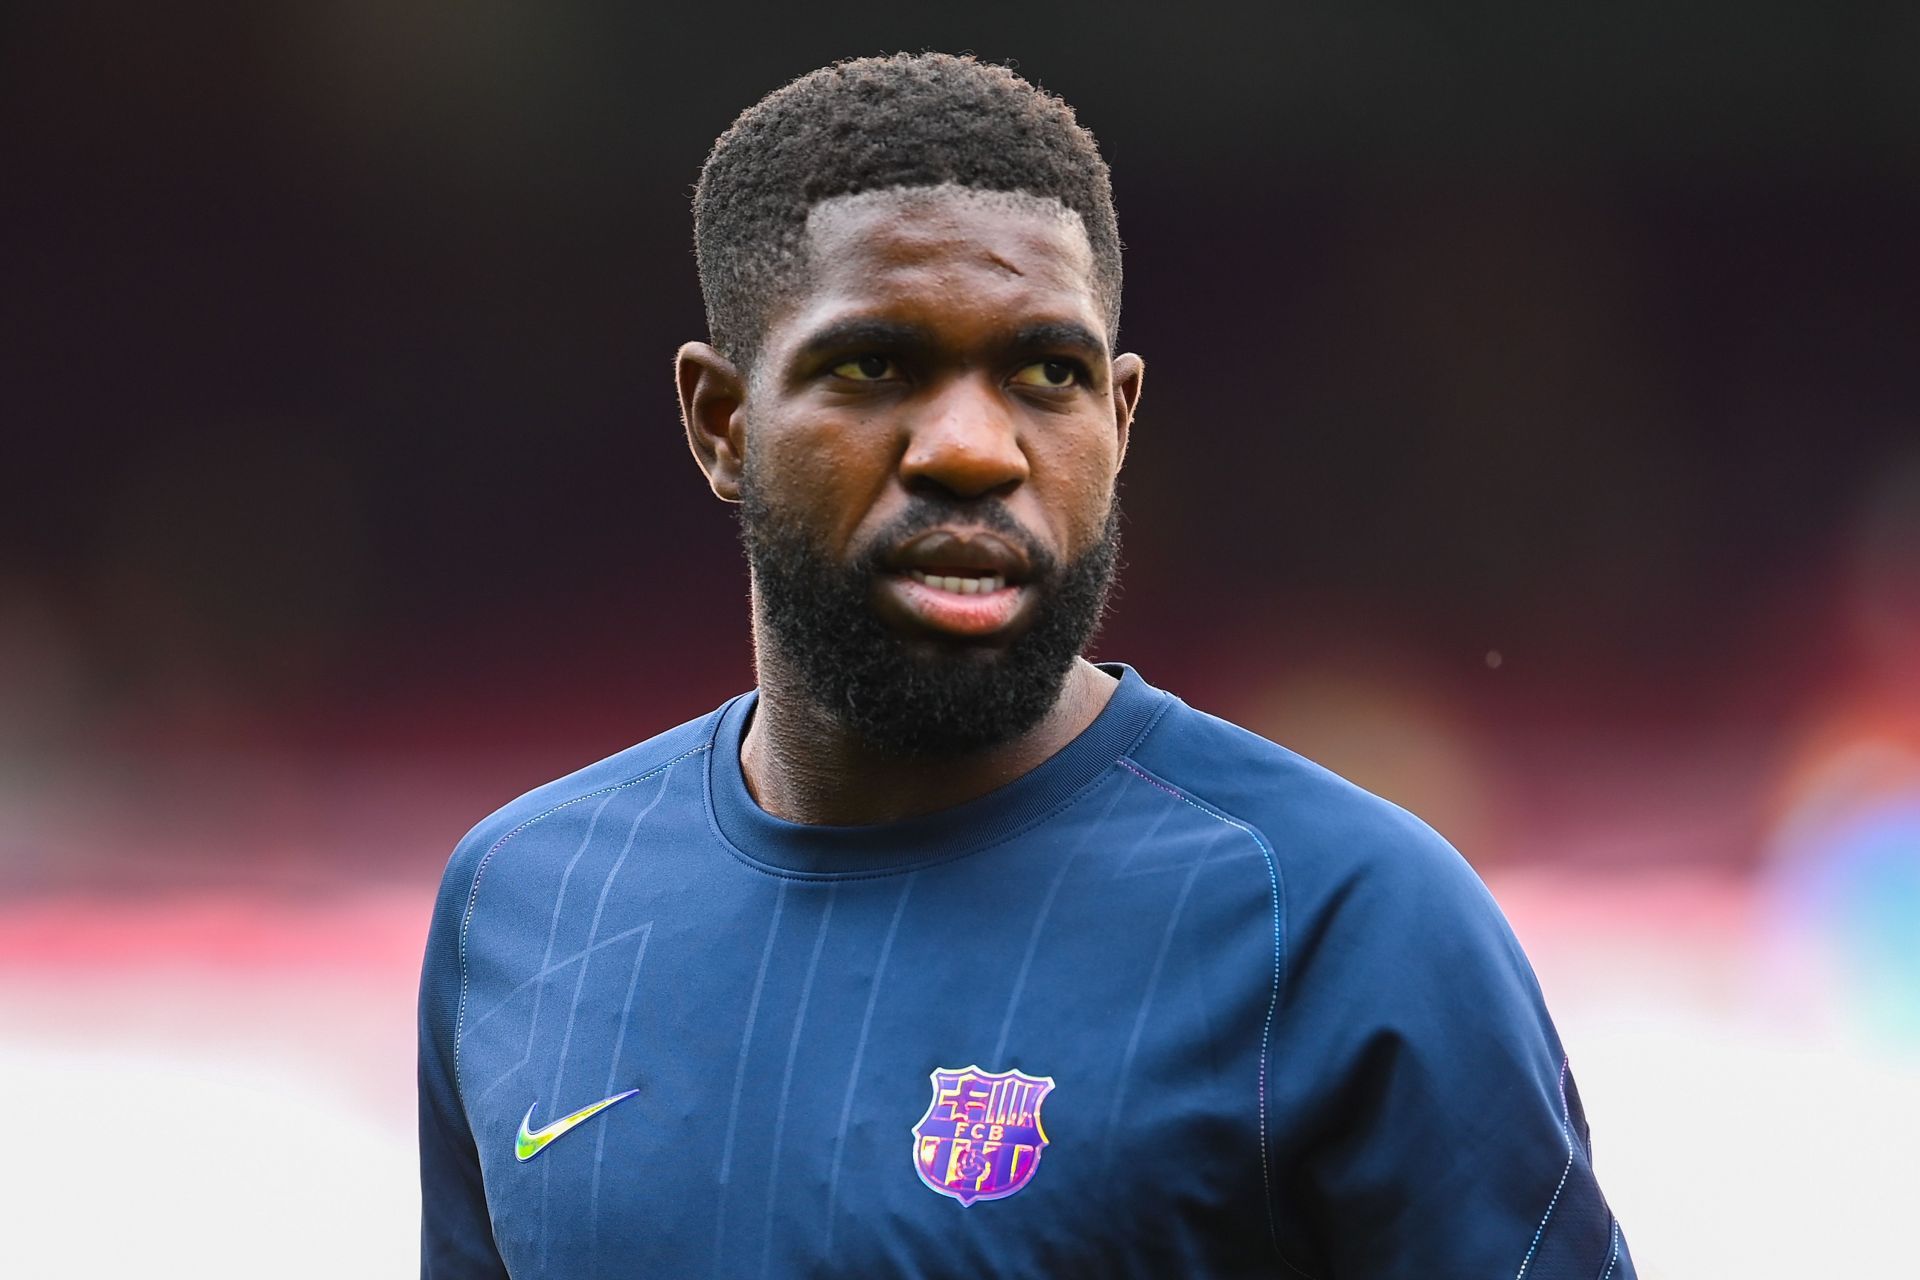 Pairing up with Gerard Pique, Samuel Umtiti formed a formidable pair for two seasons